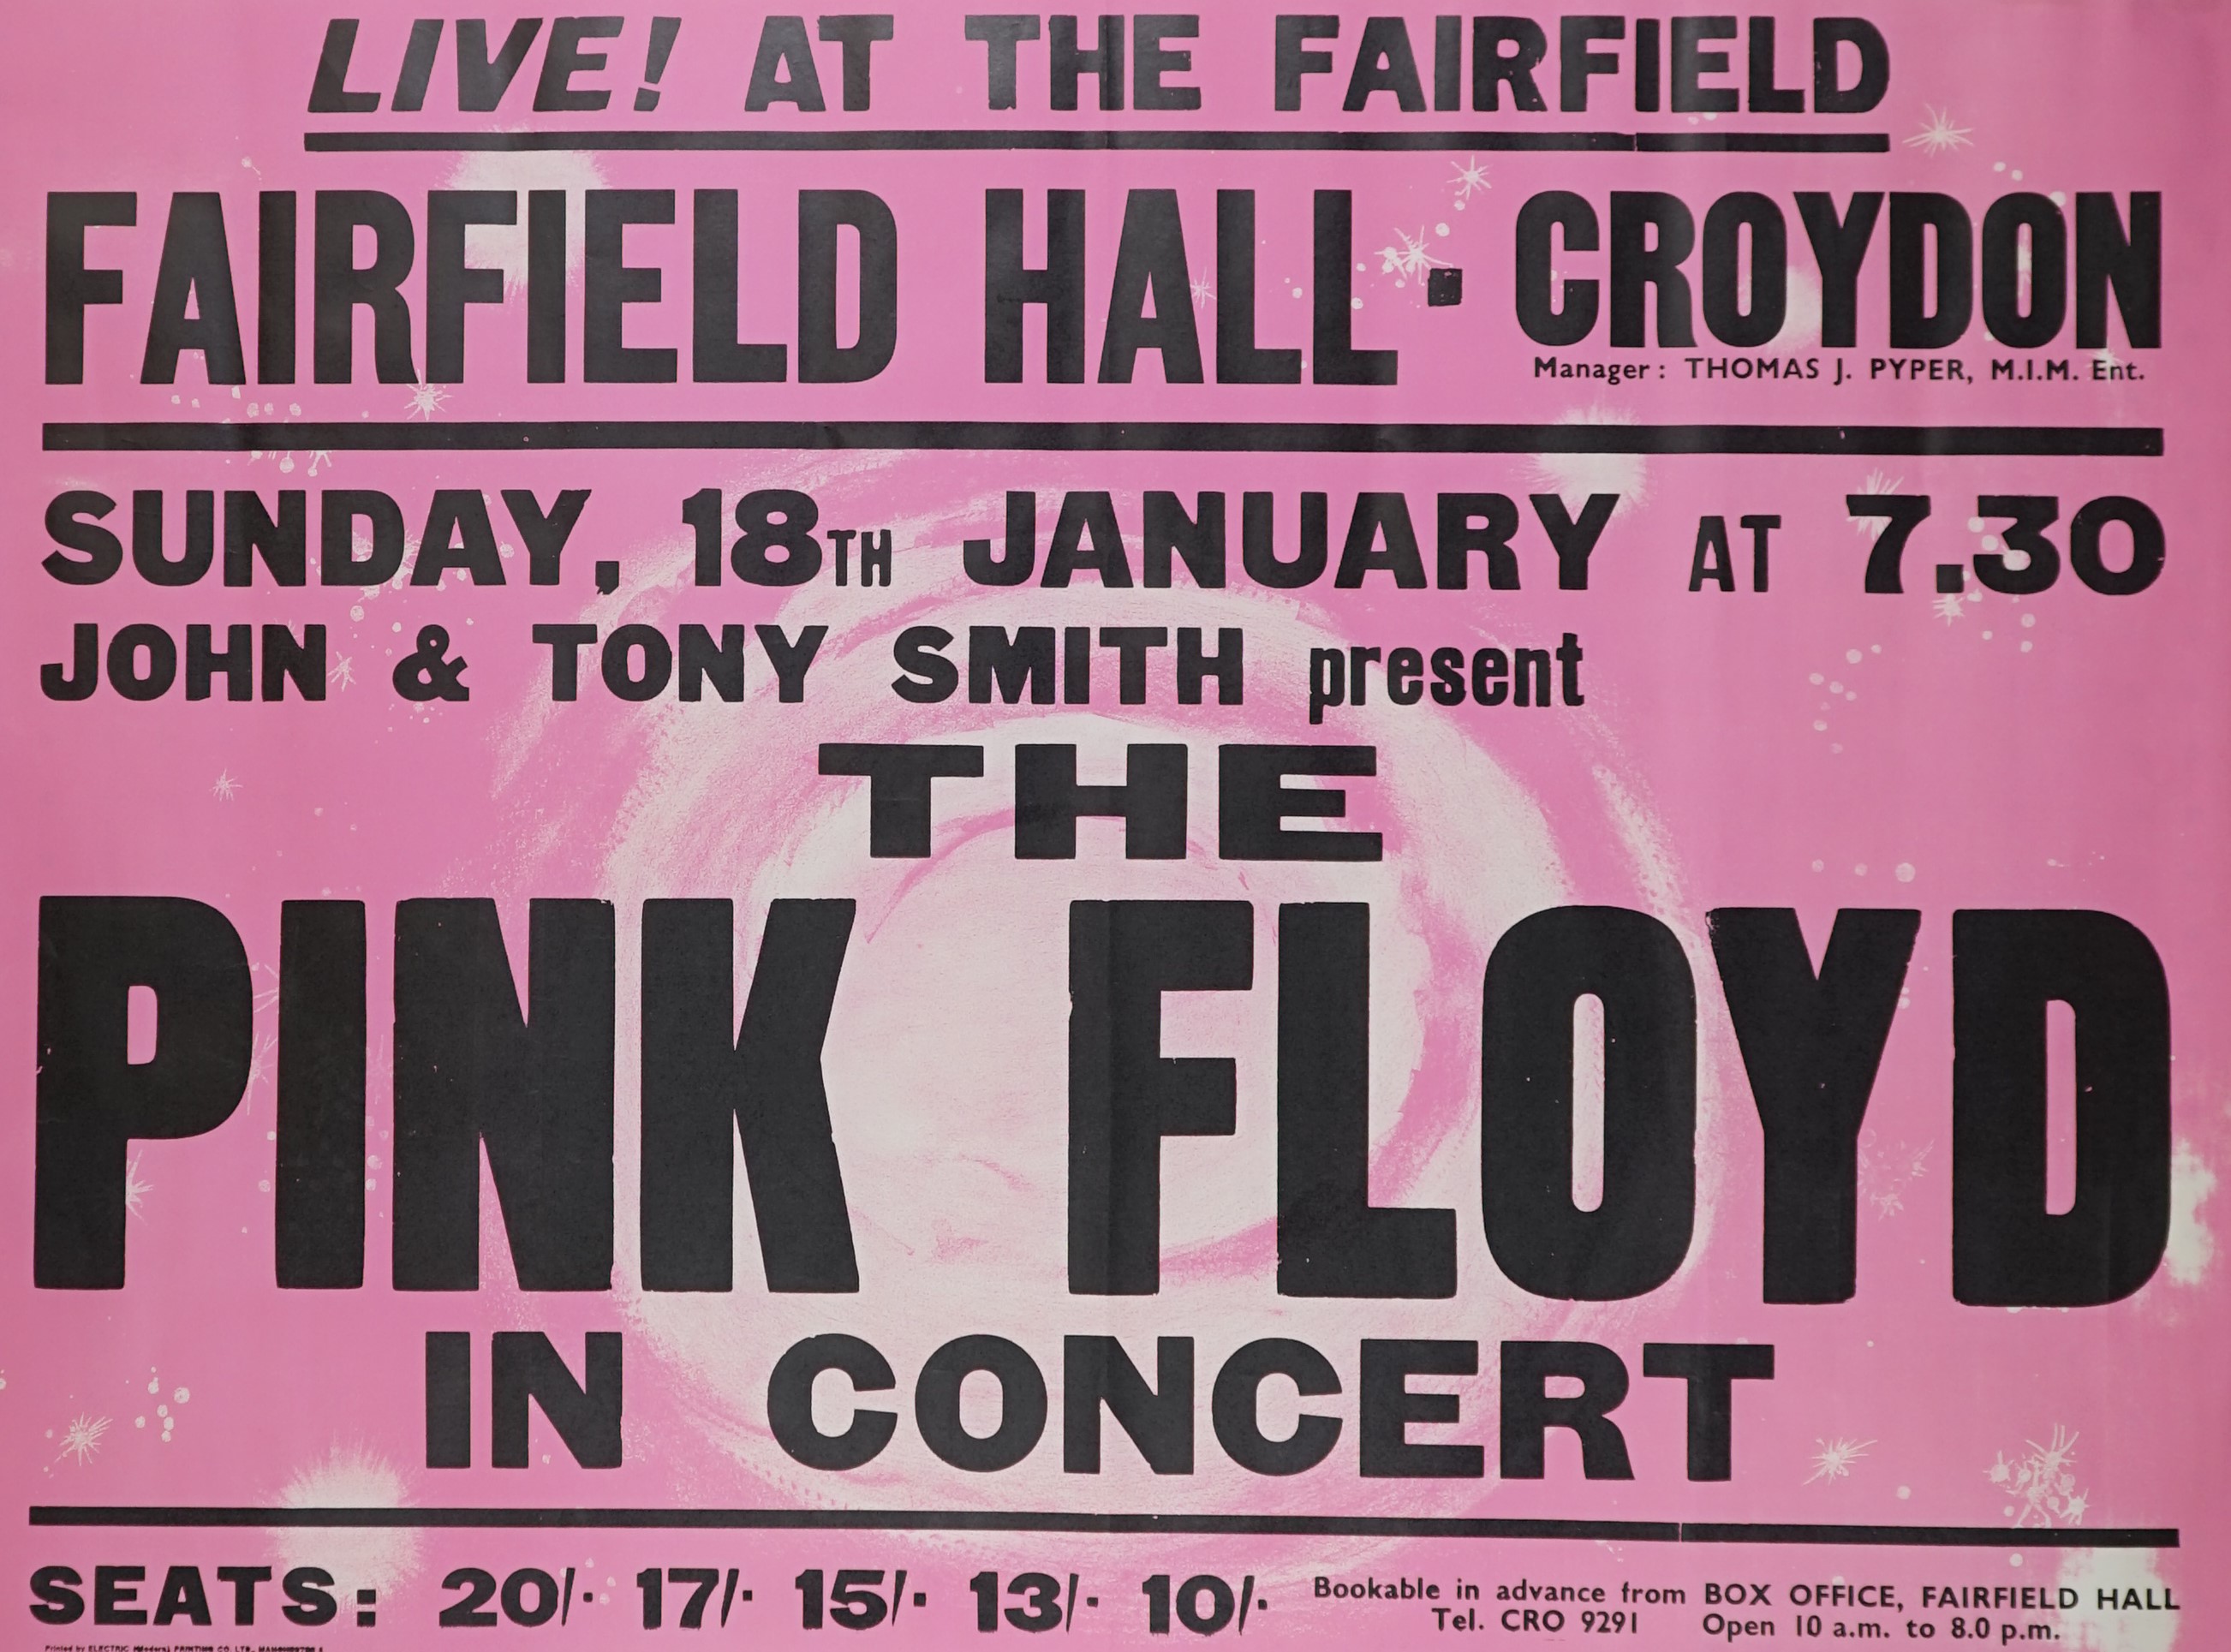 A rock poster from a collection sold at auction